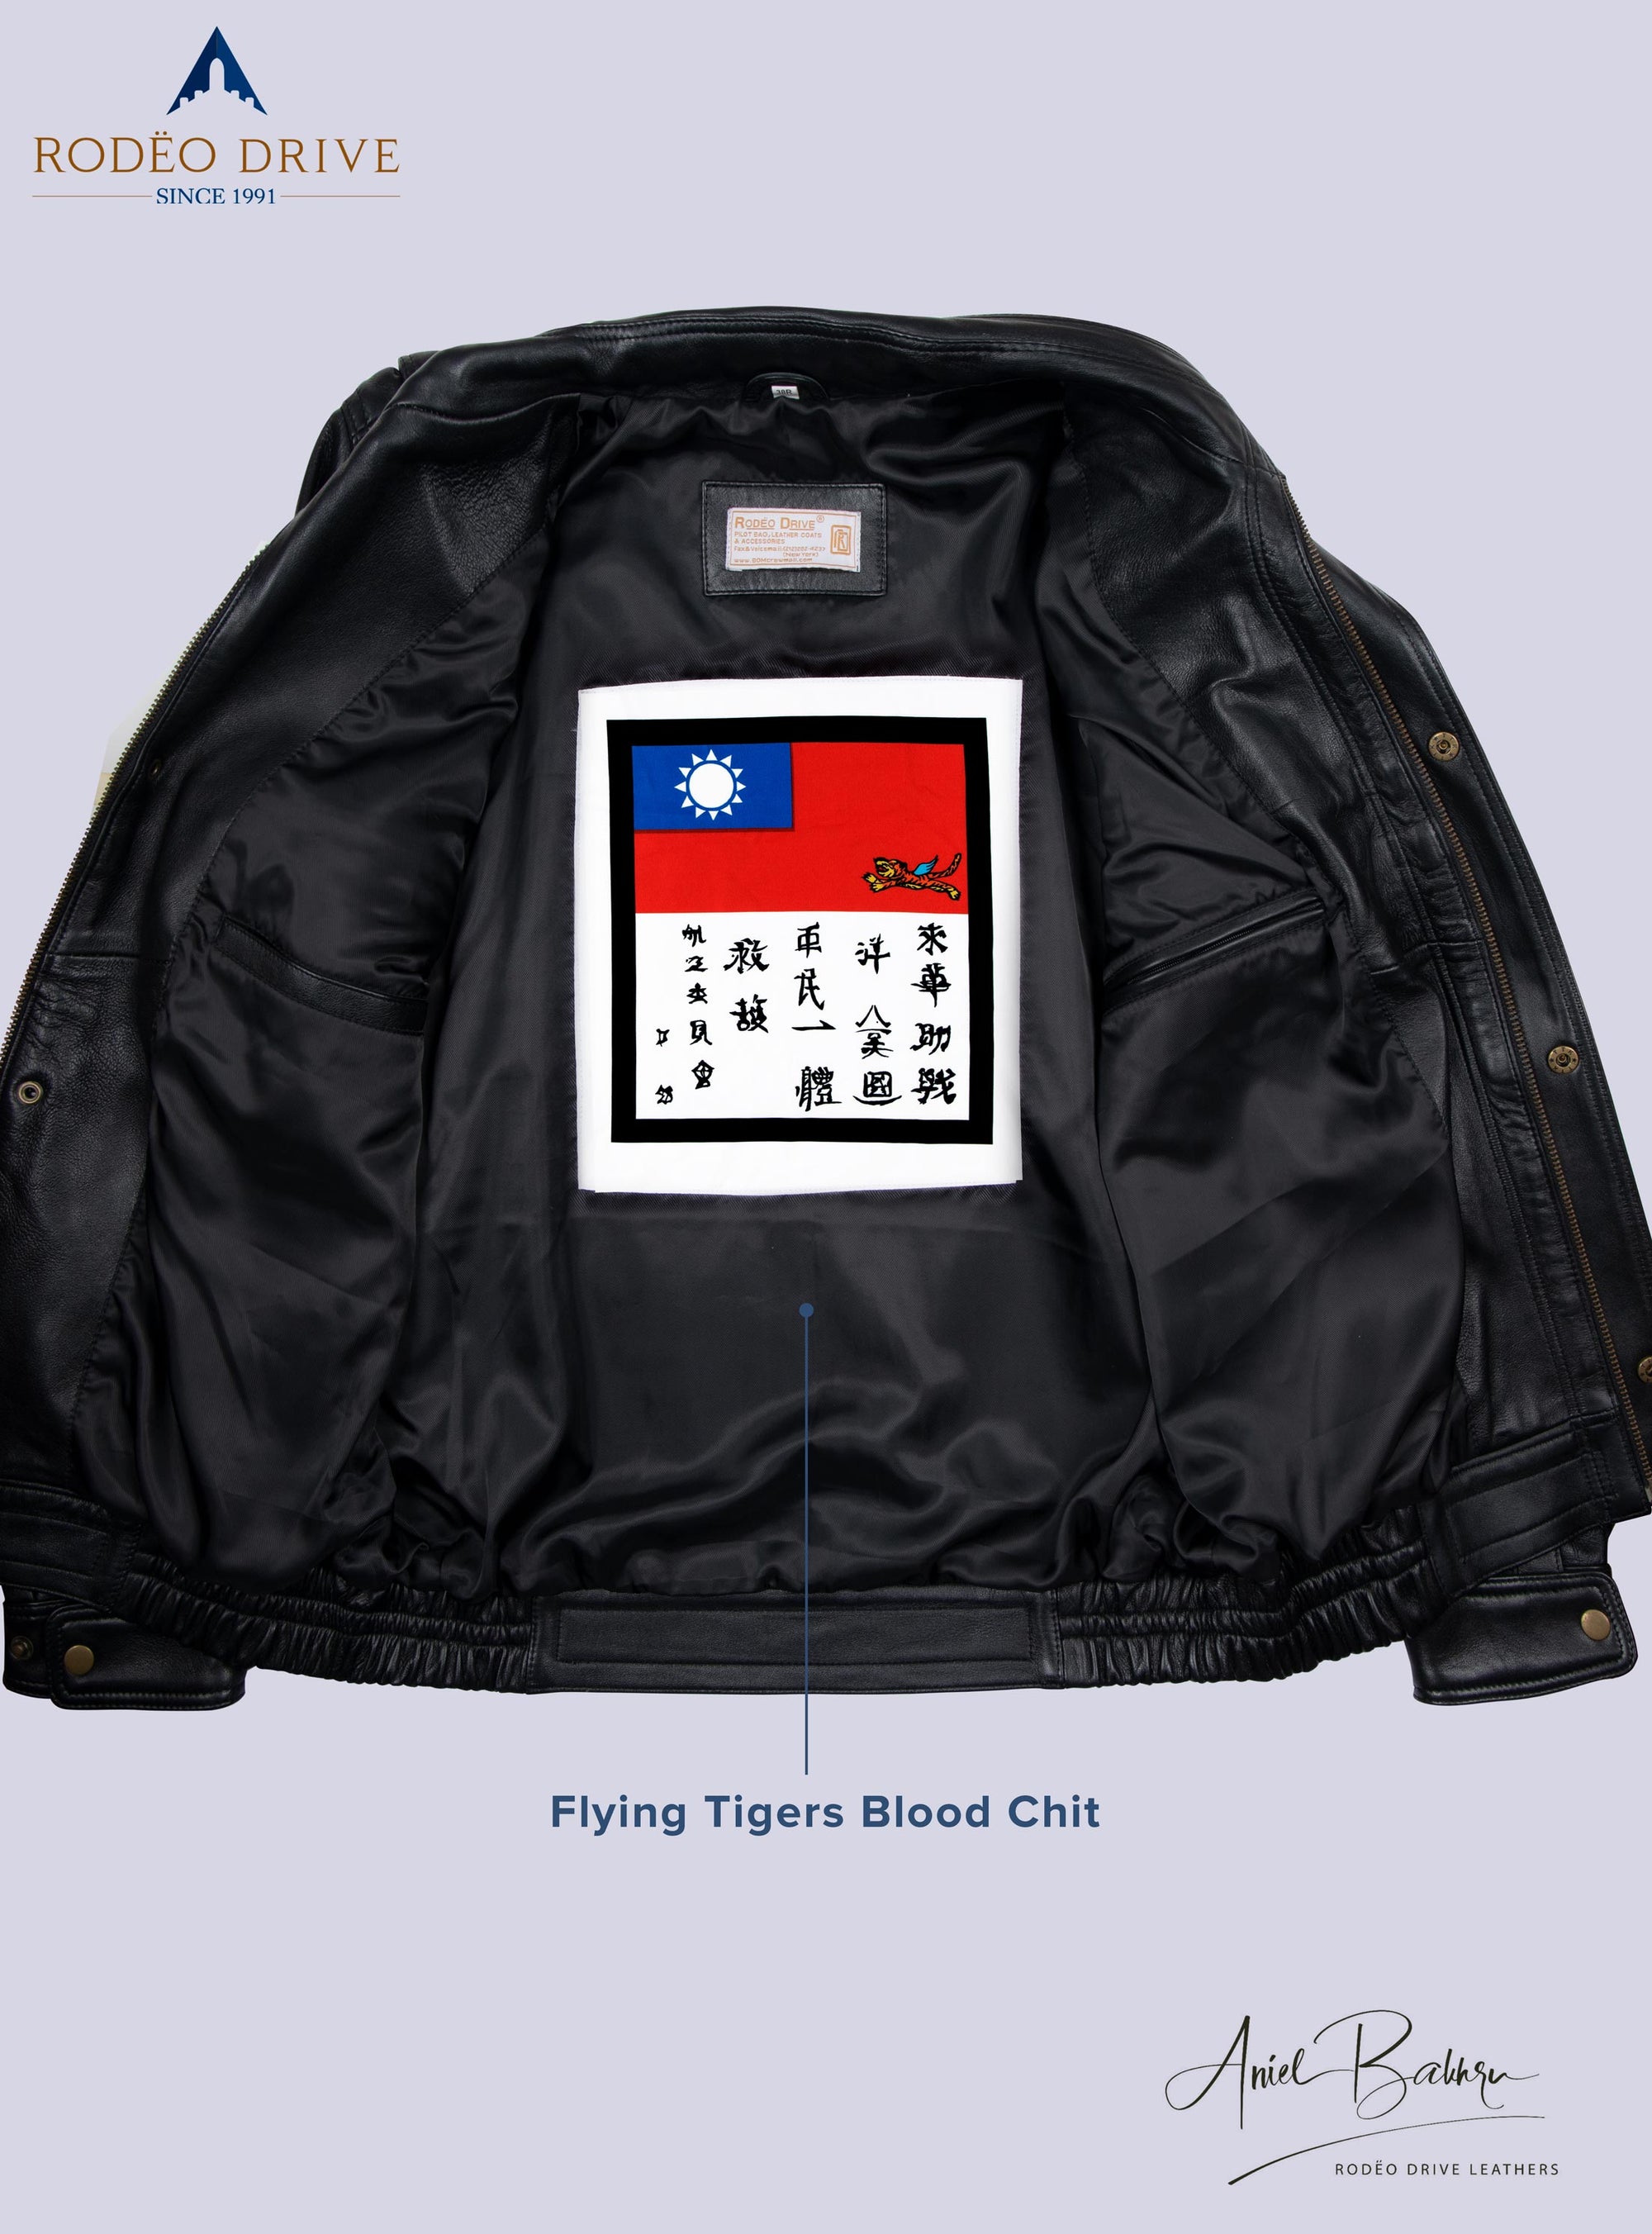 Inside image of BOMBER JACKET . Inside it Flying tigers  Blood chit is sewed